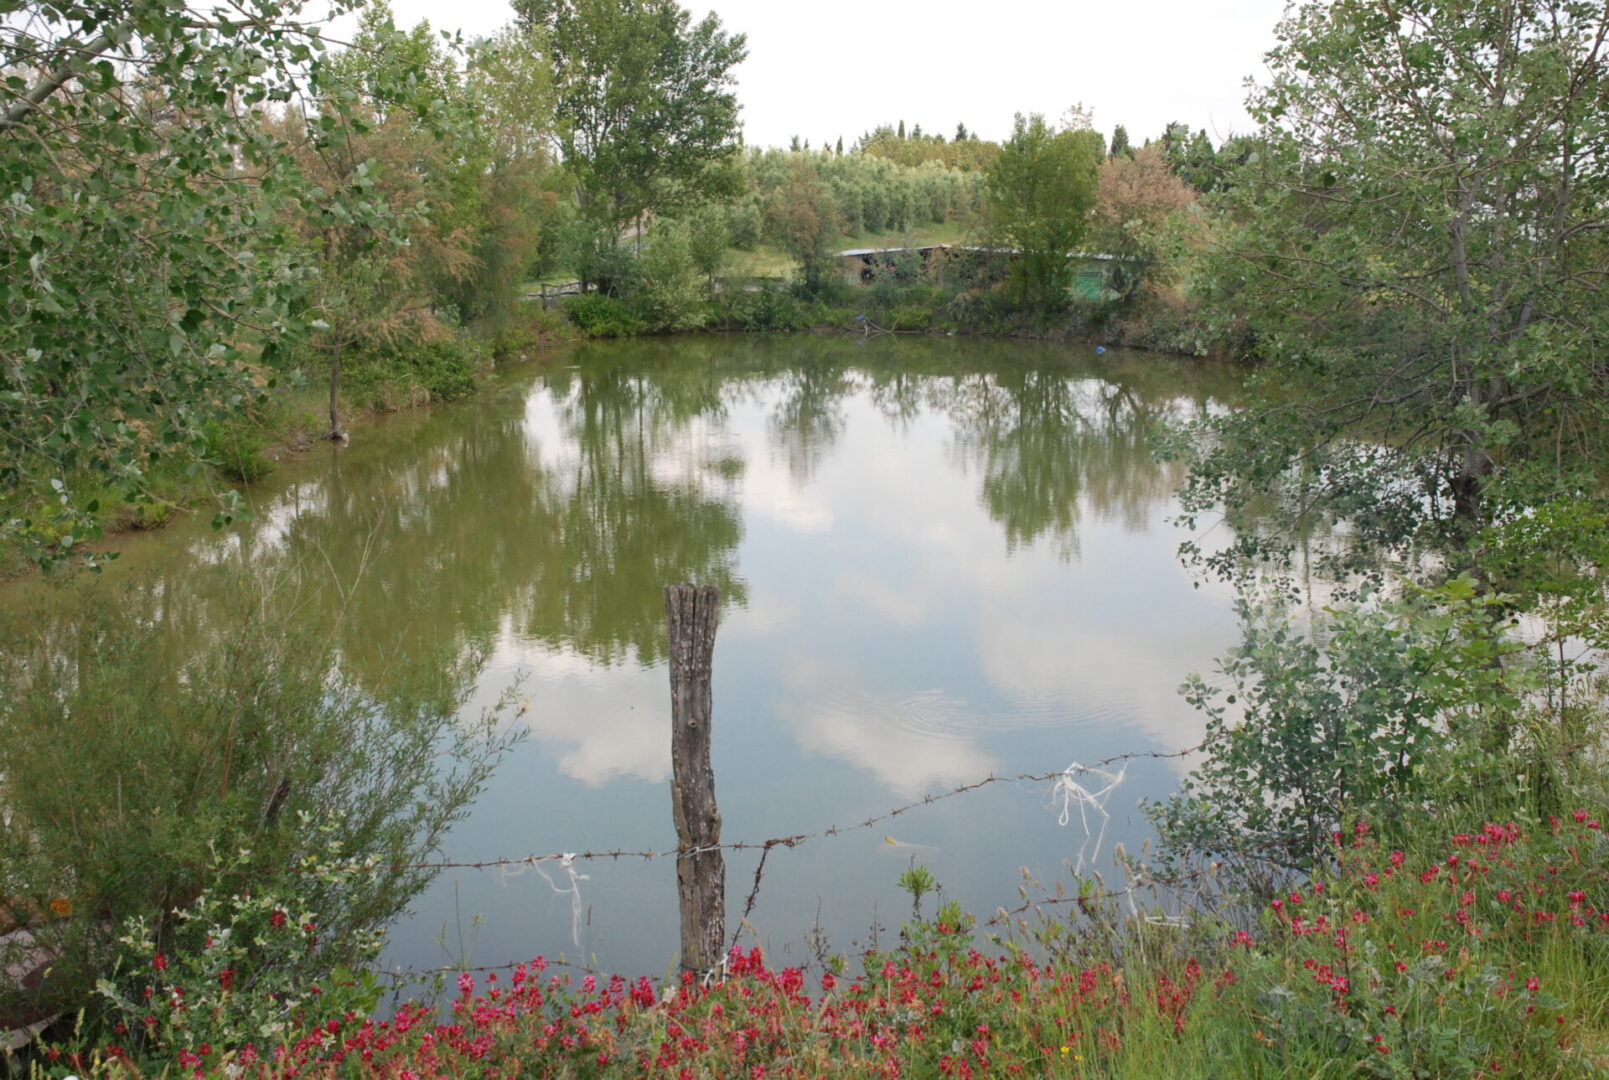 A pond with trees and flowers in the foreground.